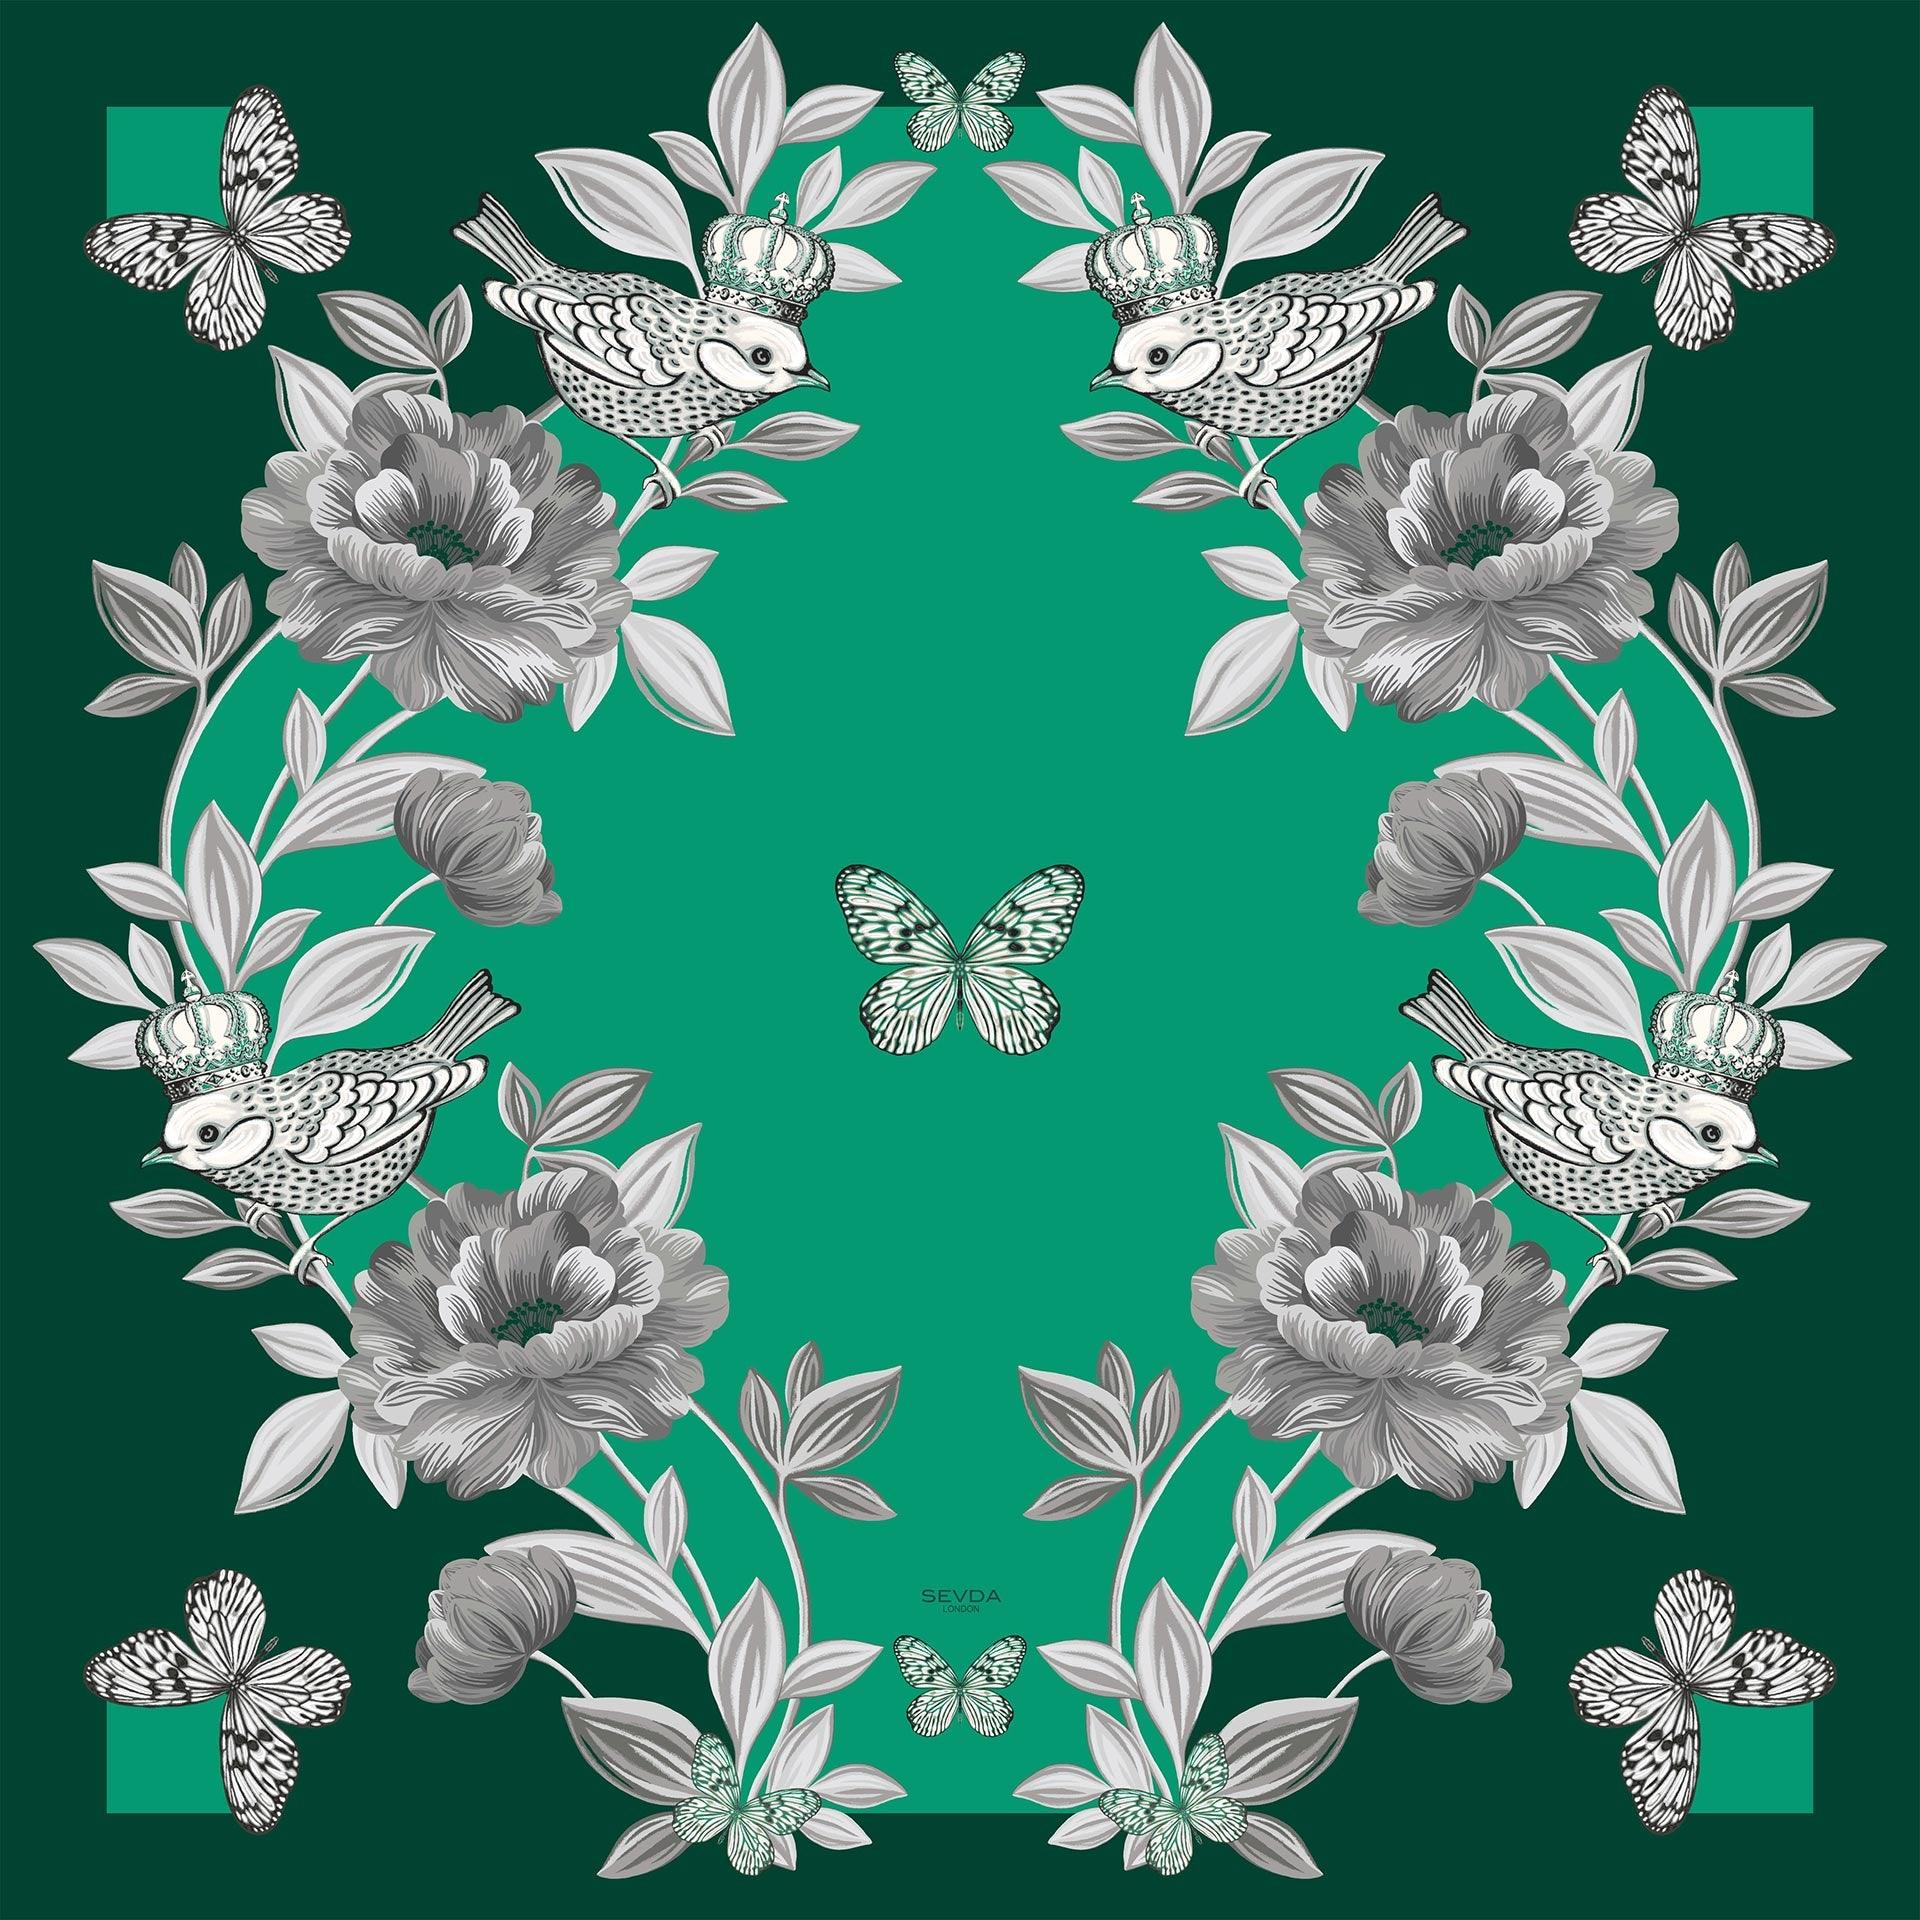 Emerald Green British Rose Garden Silk Scarf - The perfect blend of London's design and Italian craftsmanship, an exquisite gift choice.